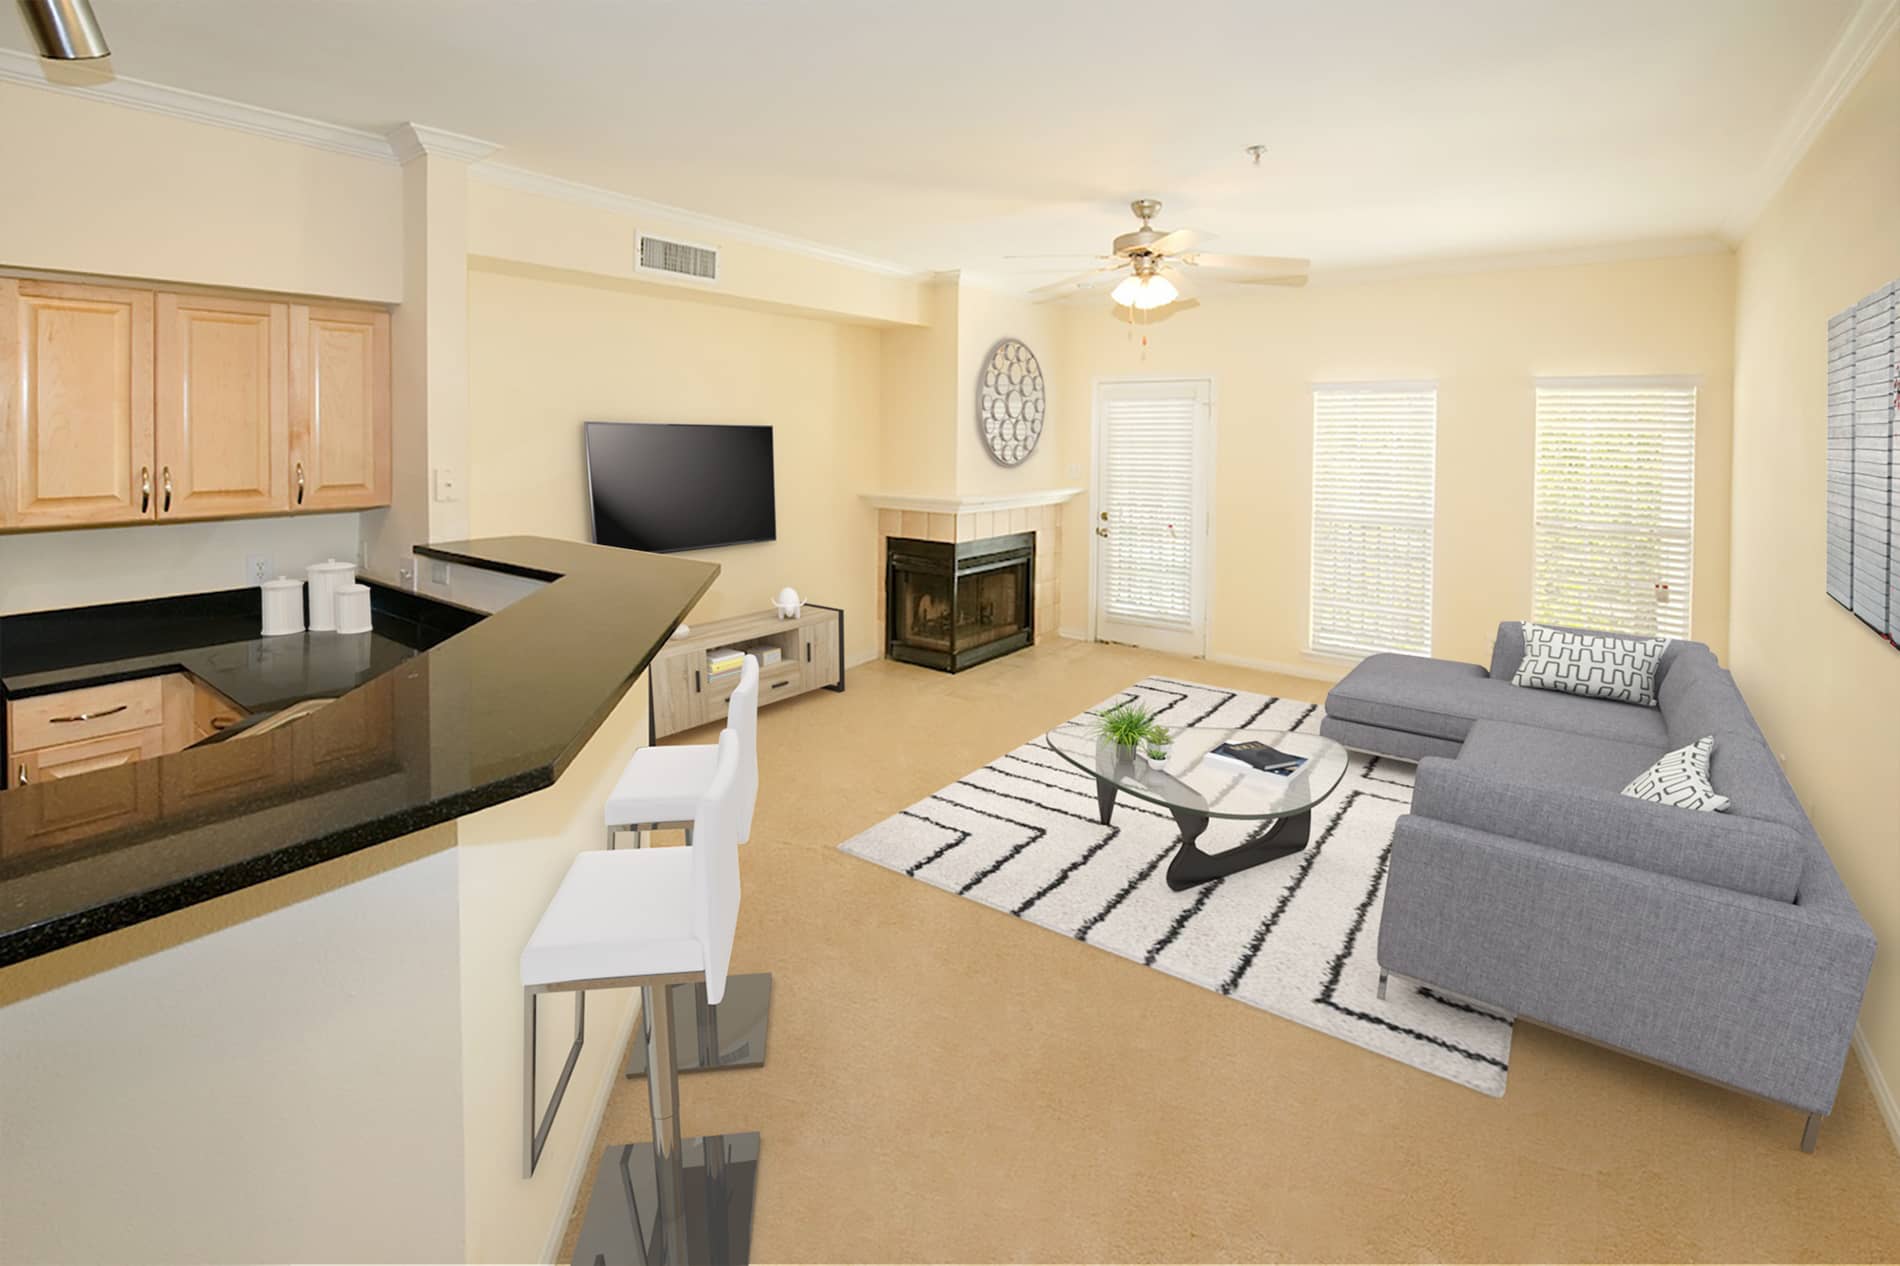 The Carriage Homes virtually staged by Rooomy